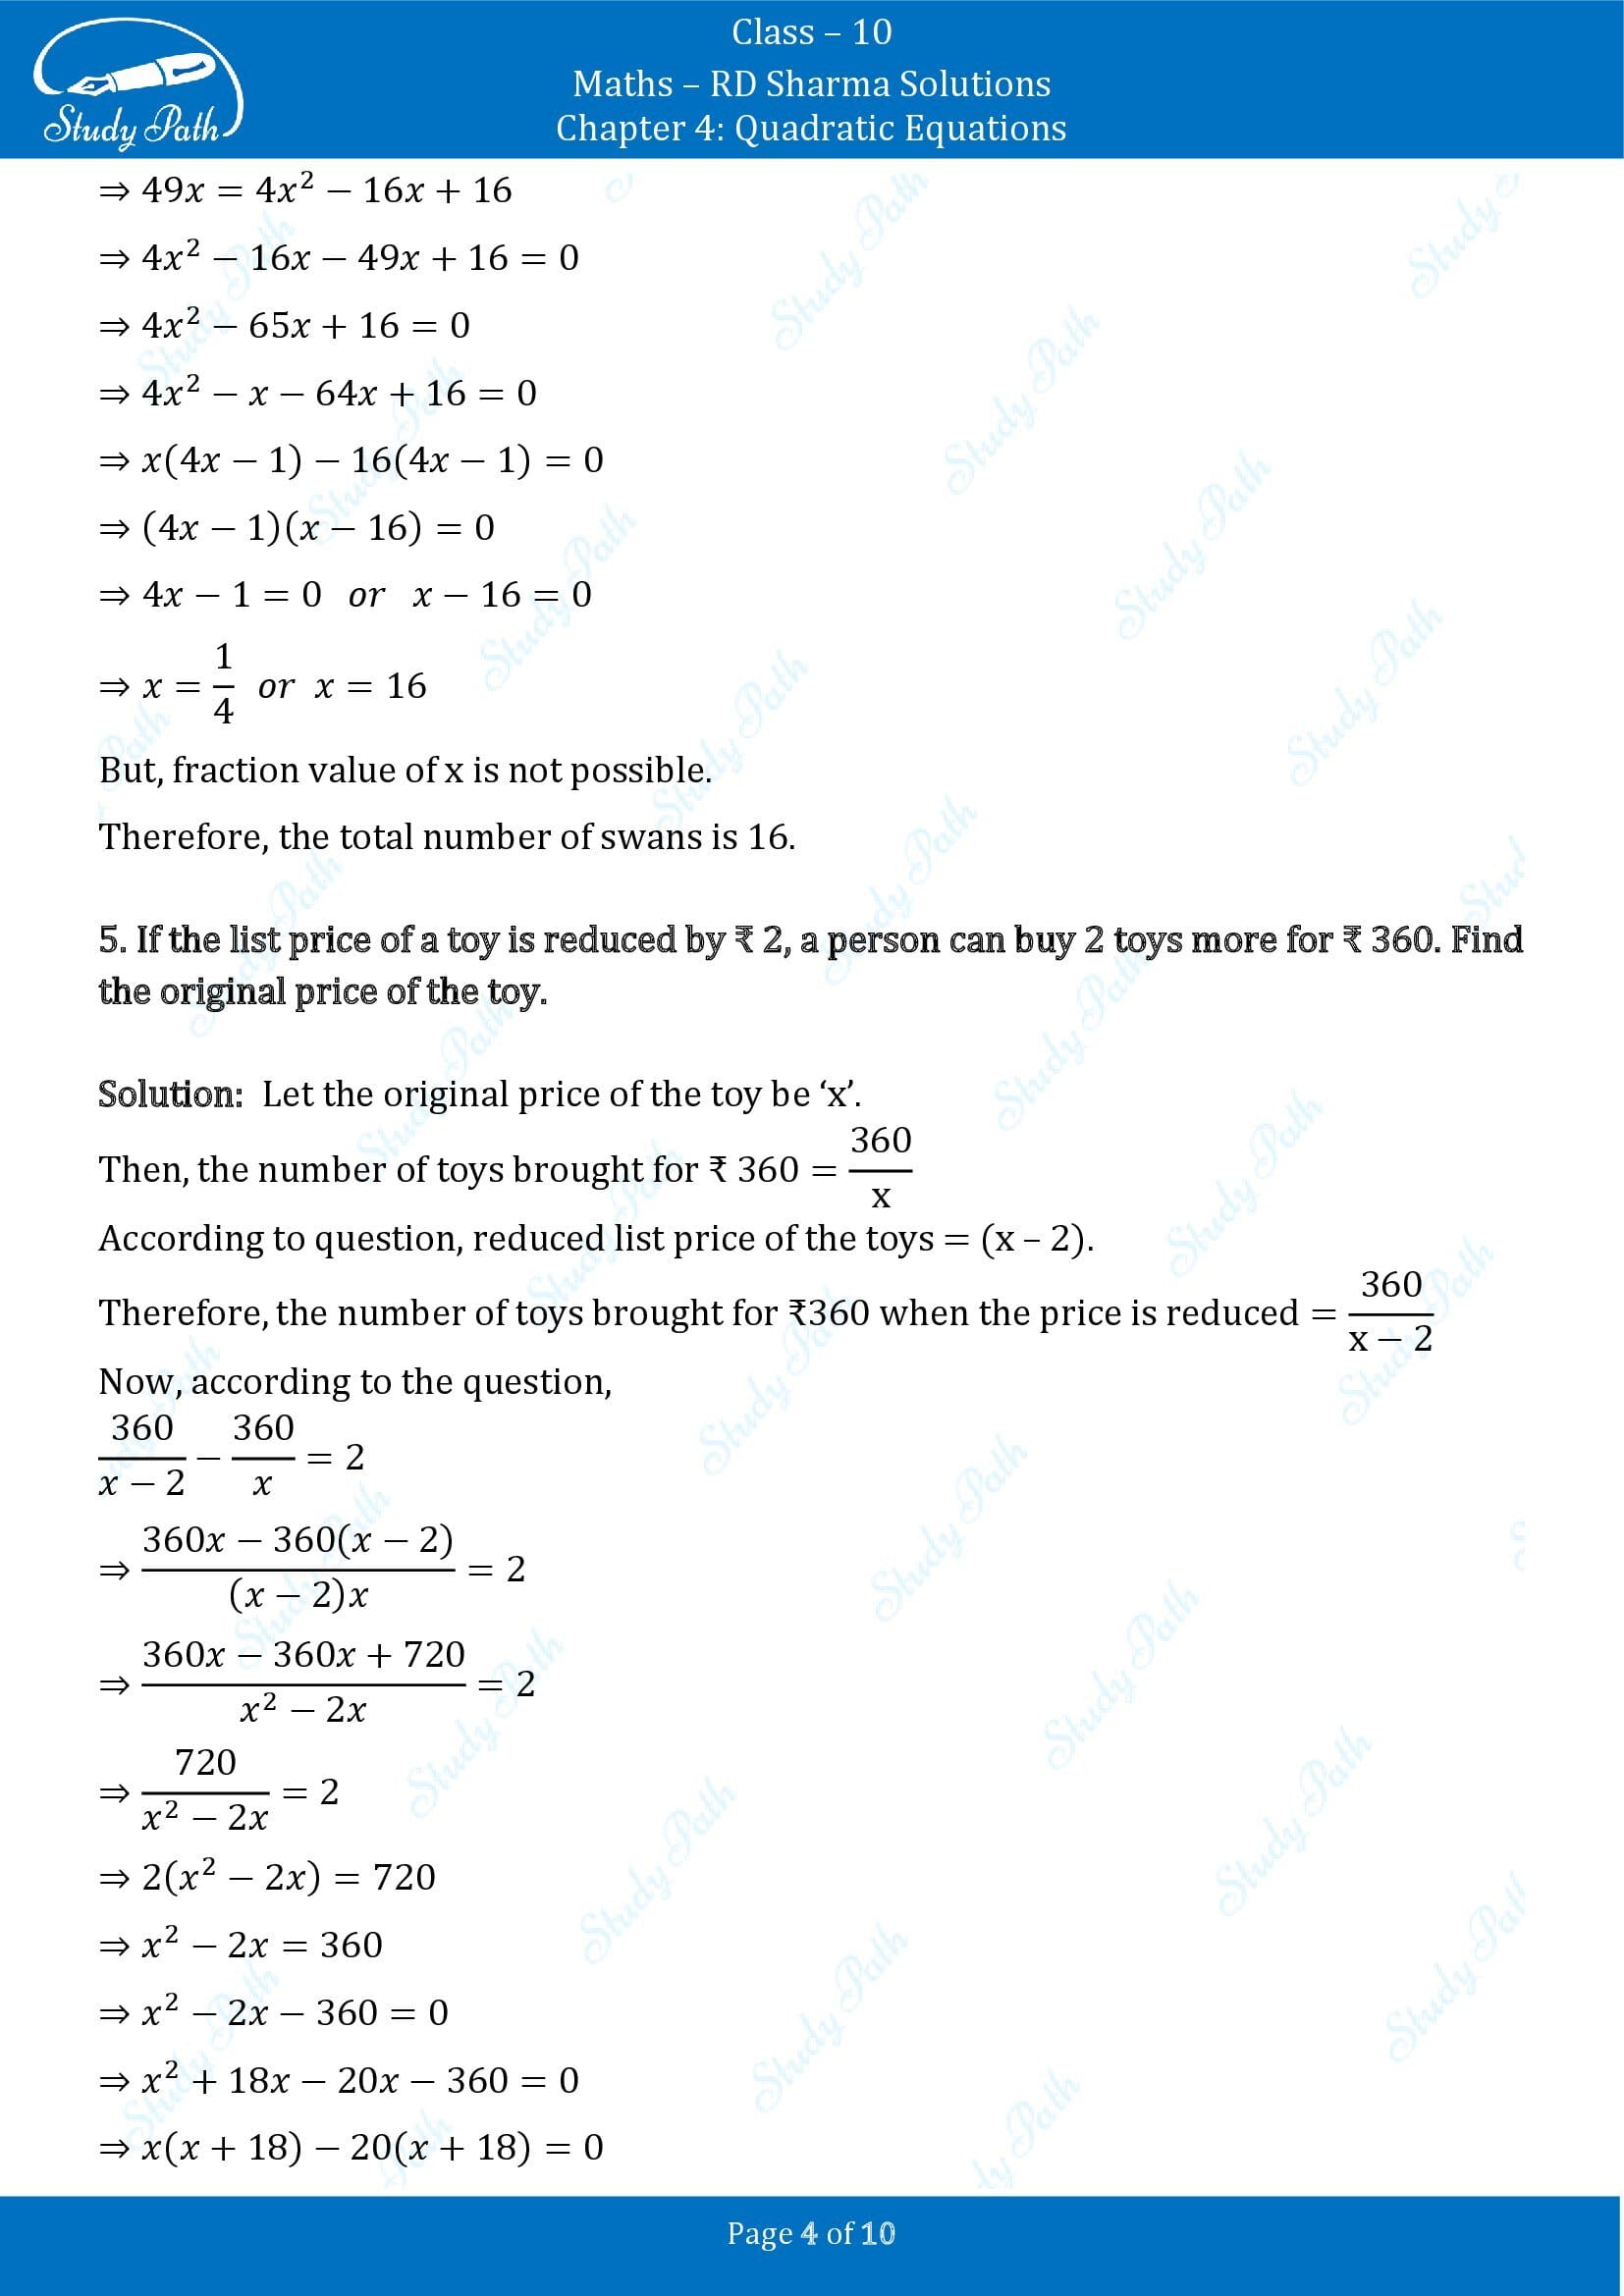 RD Sharma Solutions Class 10 Chapter 4 Quadratic Equations Exercise 4.13 00004